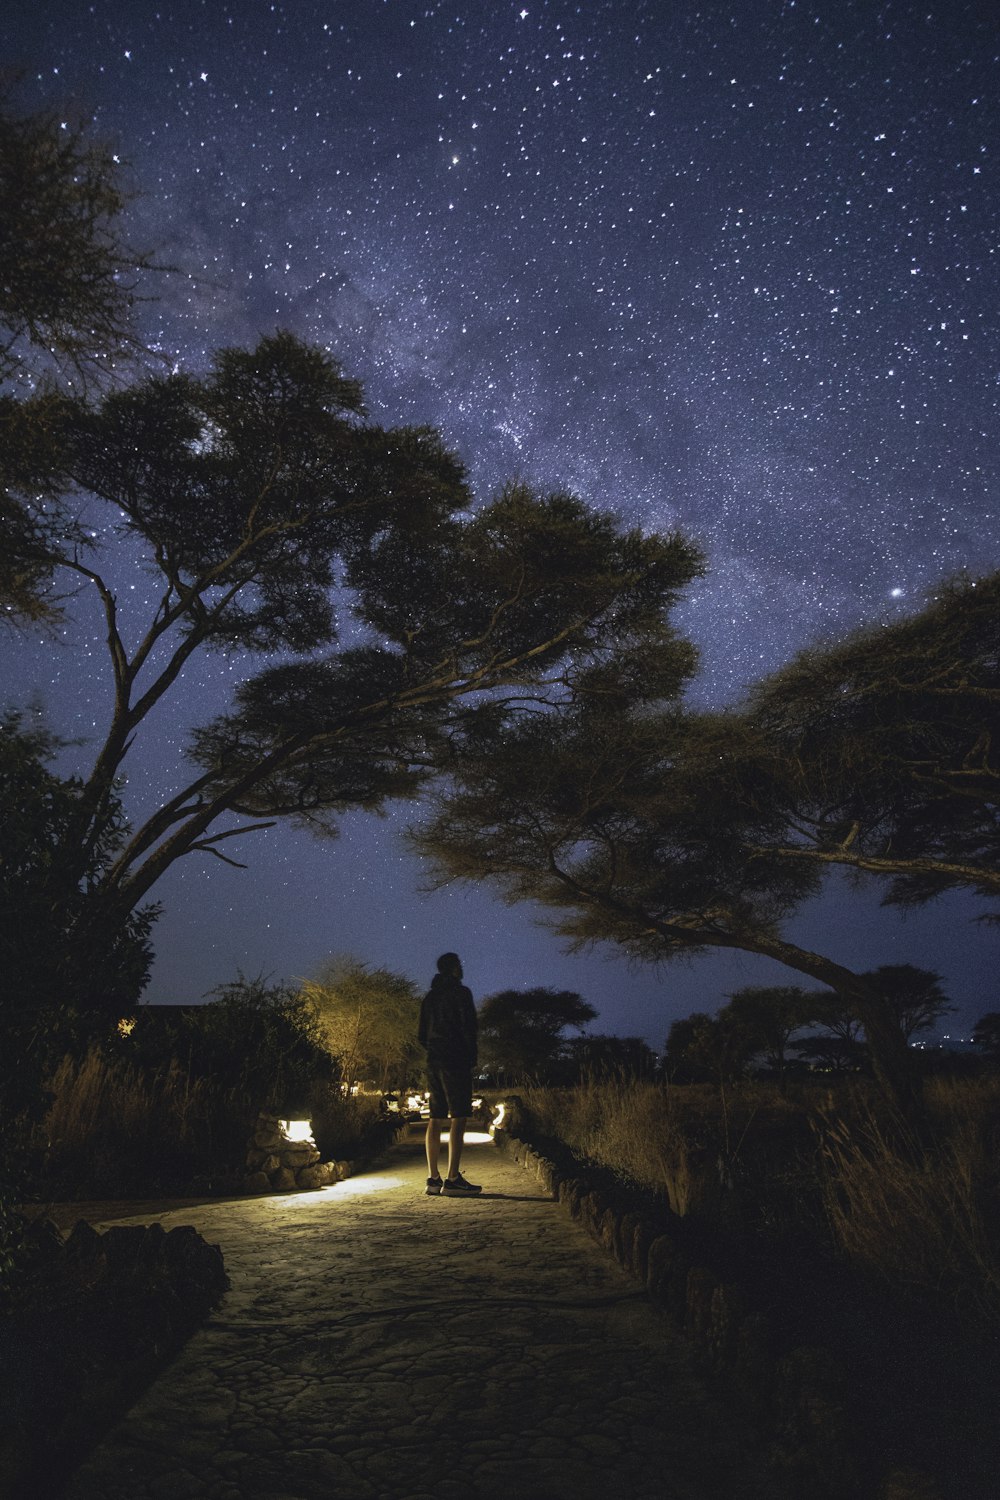 man and woman walking on pathway between trees under starry night